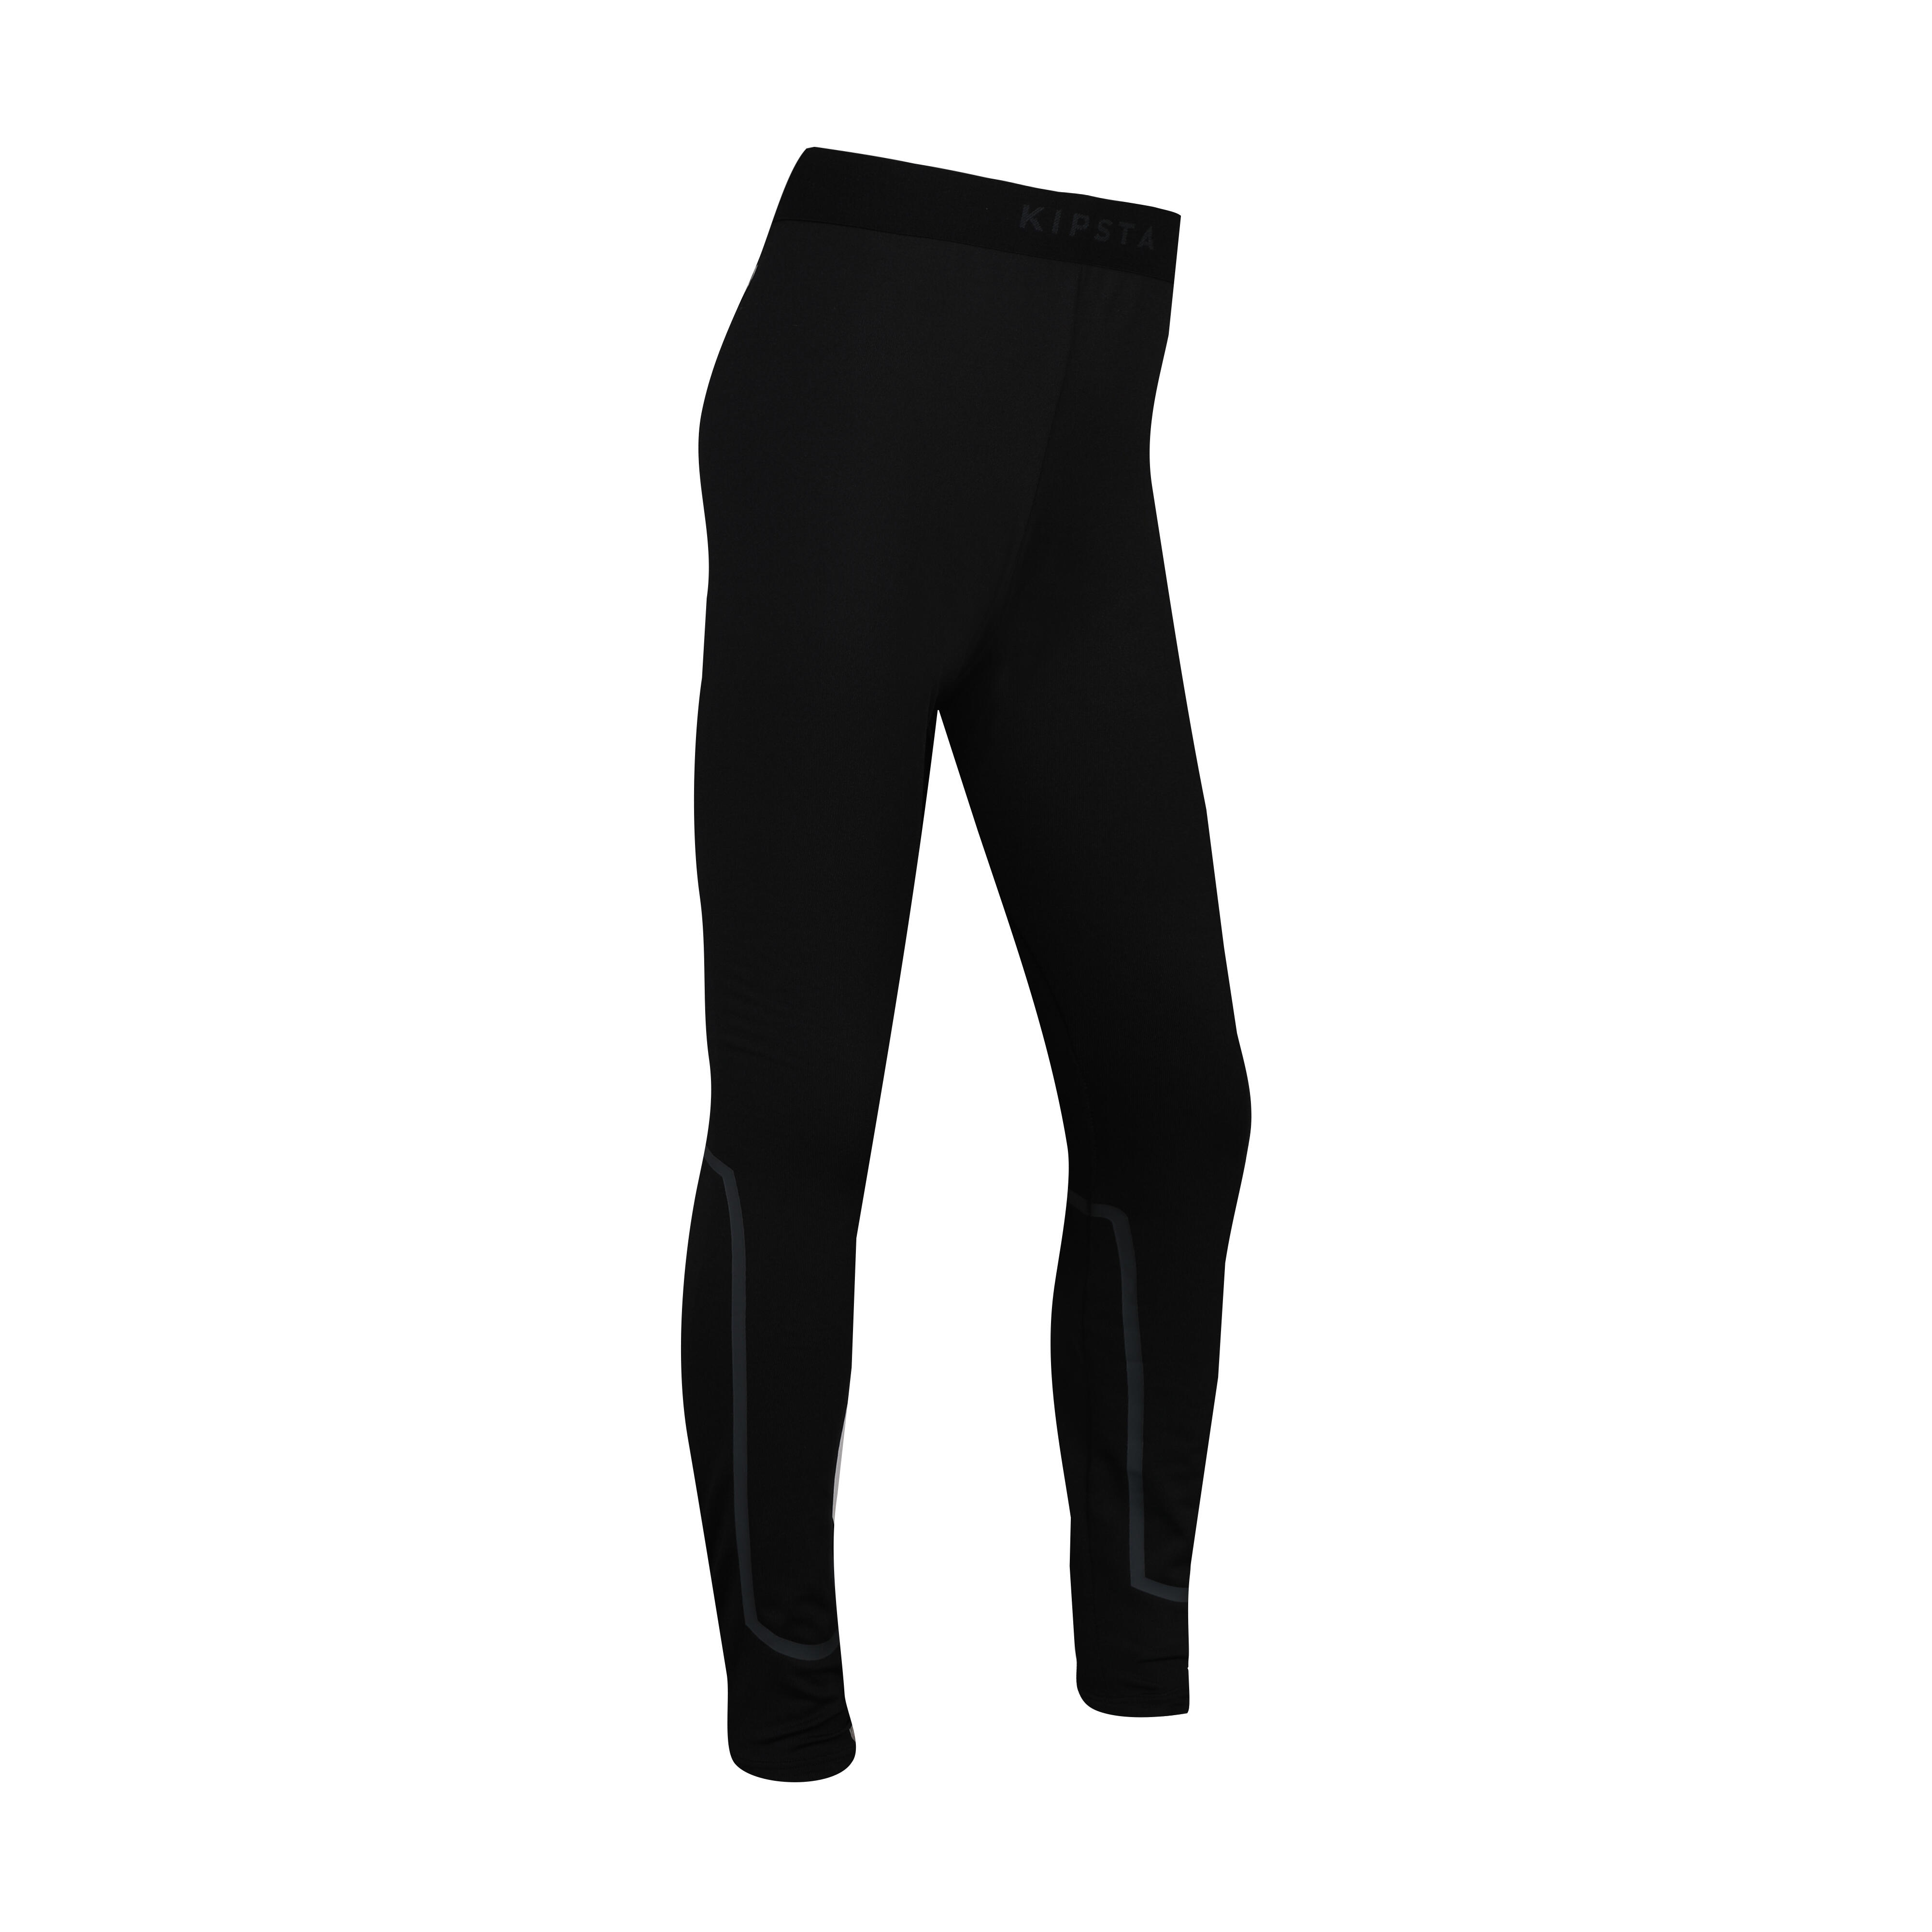 COOLOMG Compression Running 3/4 Tights Capri Pants Leggings Quick Dry For  Men Youth Boy Black – COOLOMG - Football Baseball Basketball Gears